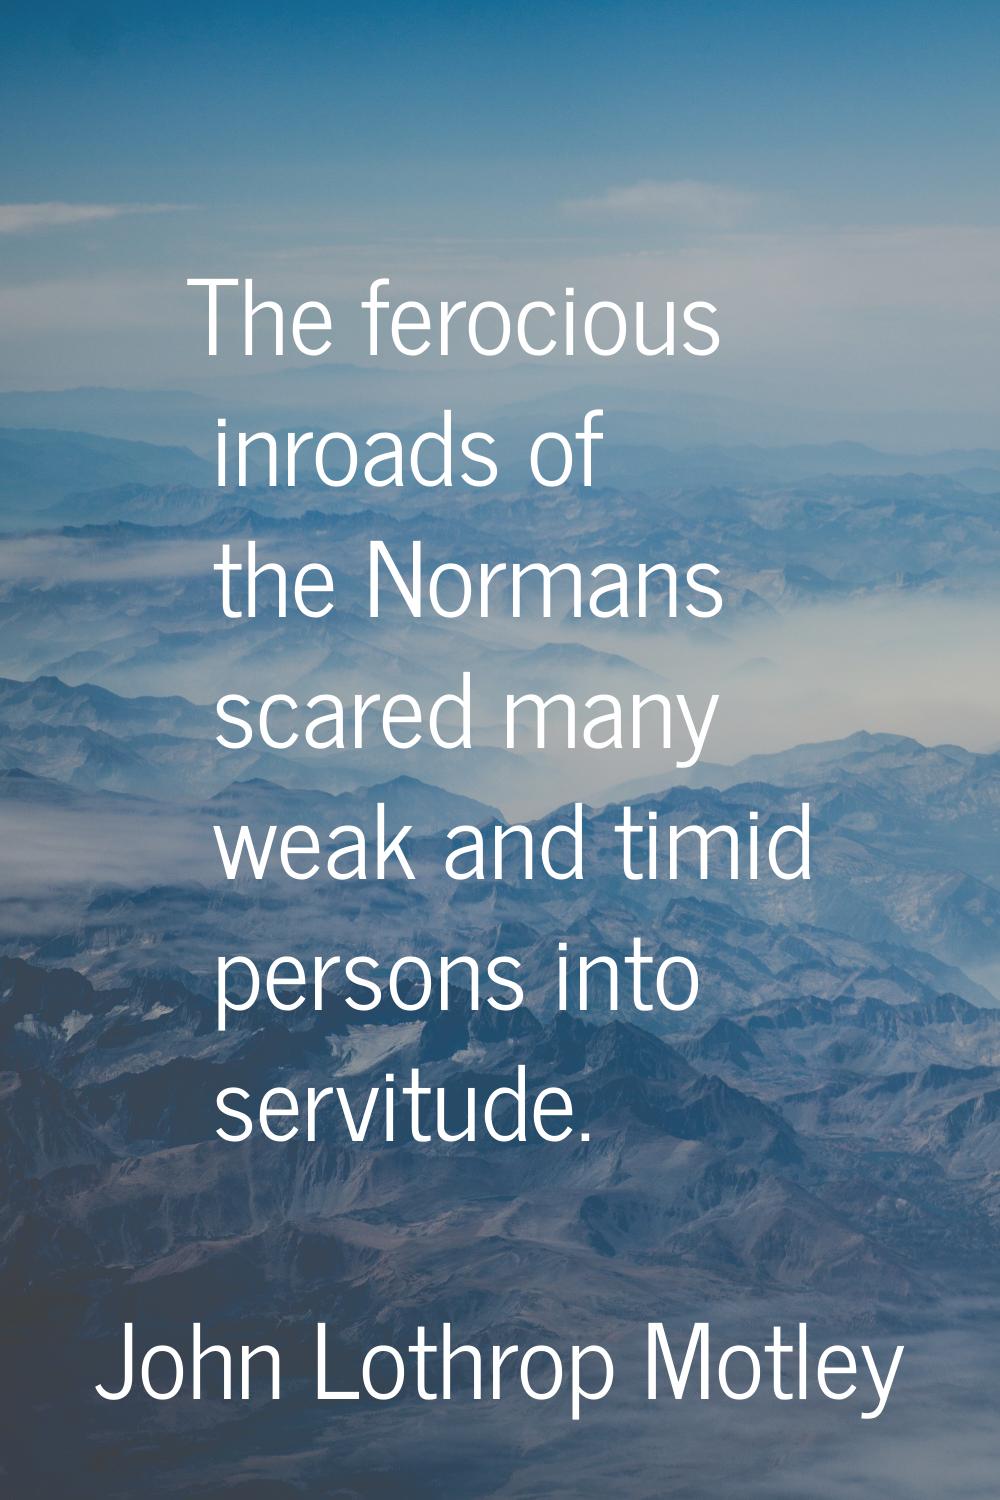 The ferocious inroads of the Normans scared many weak and timid persons into servitude.